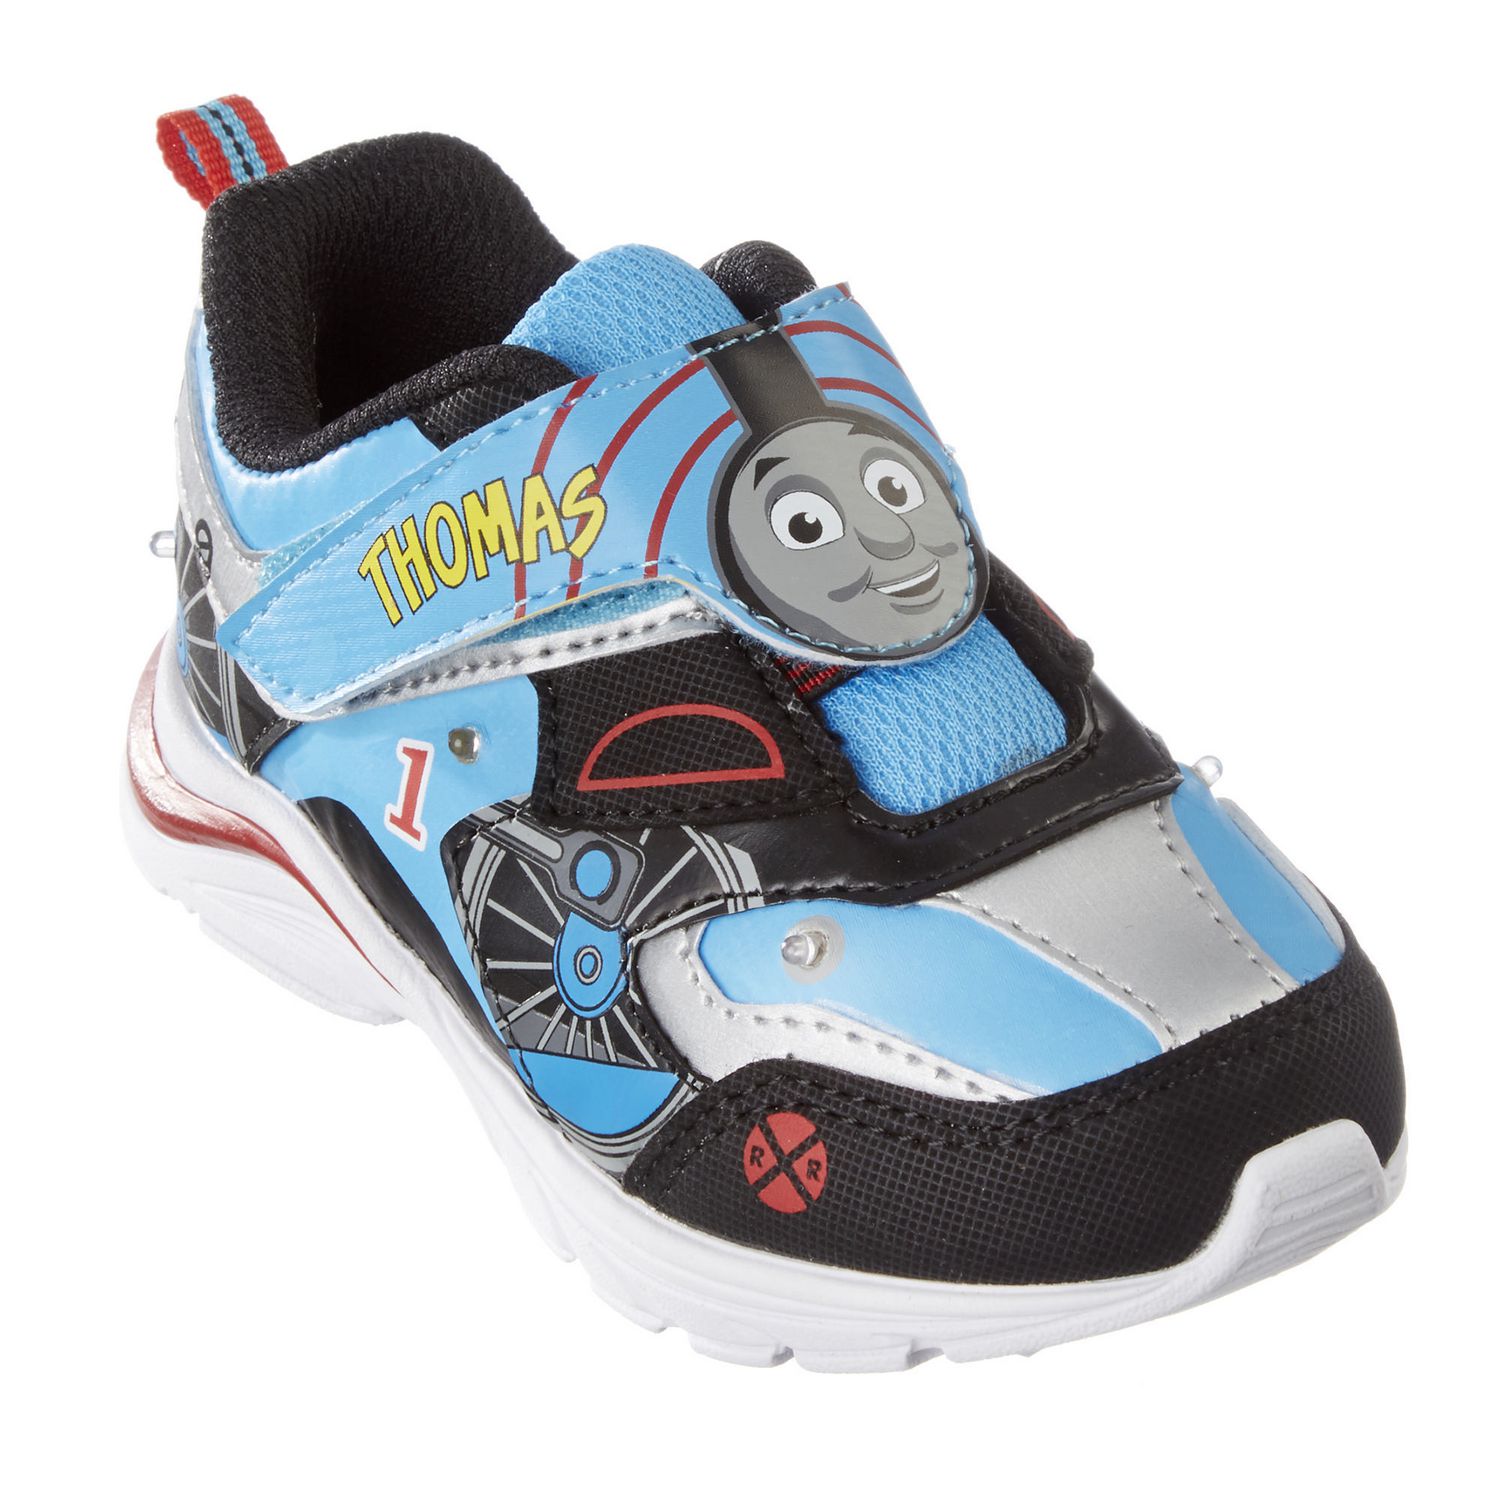 Thomas and Friends Toddler Boys' Athletic Shoes | Walmart Canada